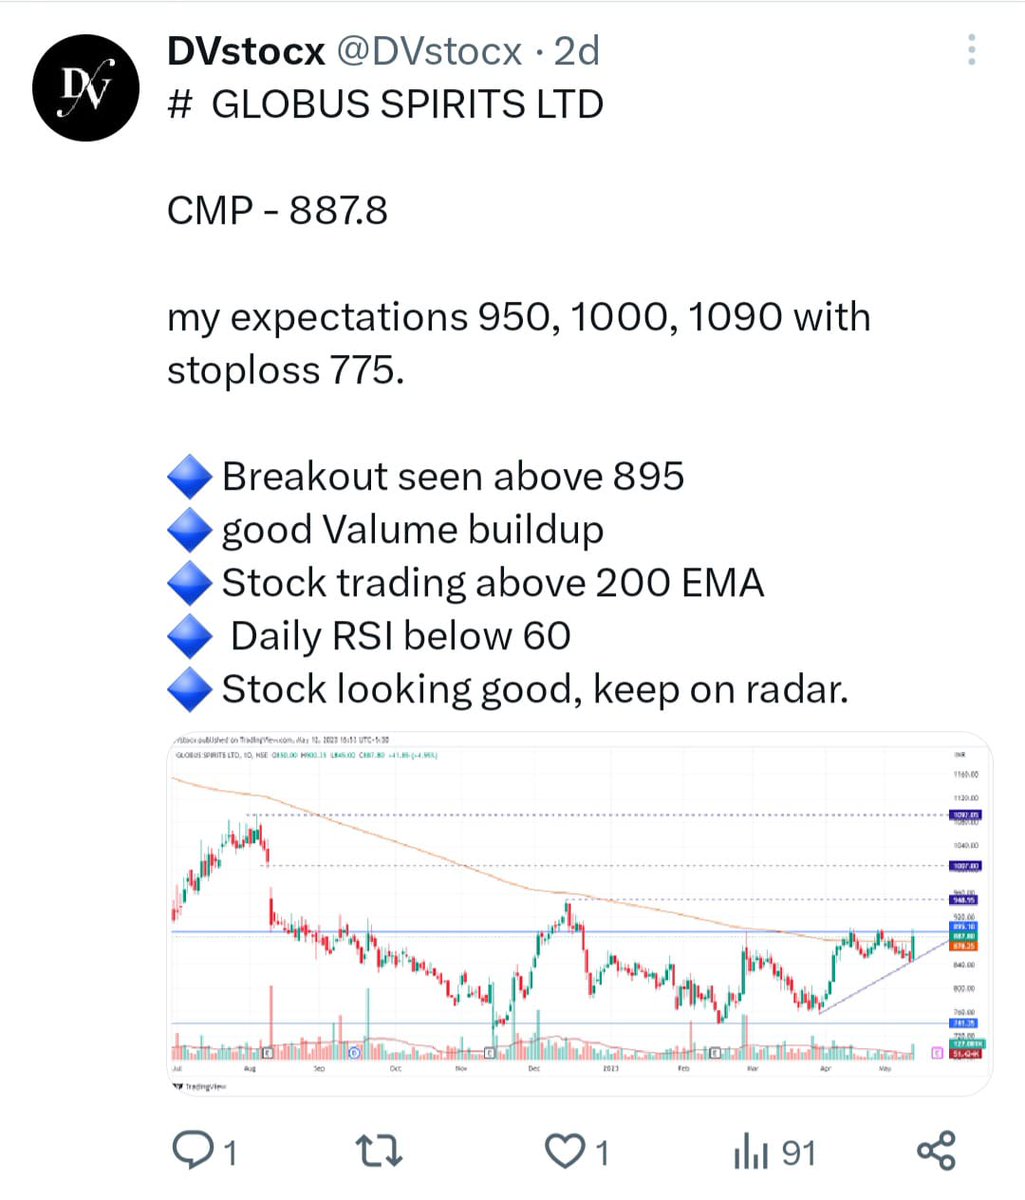 #  GLOBUS SPIRITS LTD : 

from 895 to 1010 🔥🔥🔥

1st and 2nd Target hit,  just 2 days over 12% up.